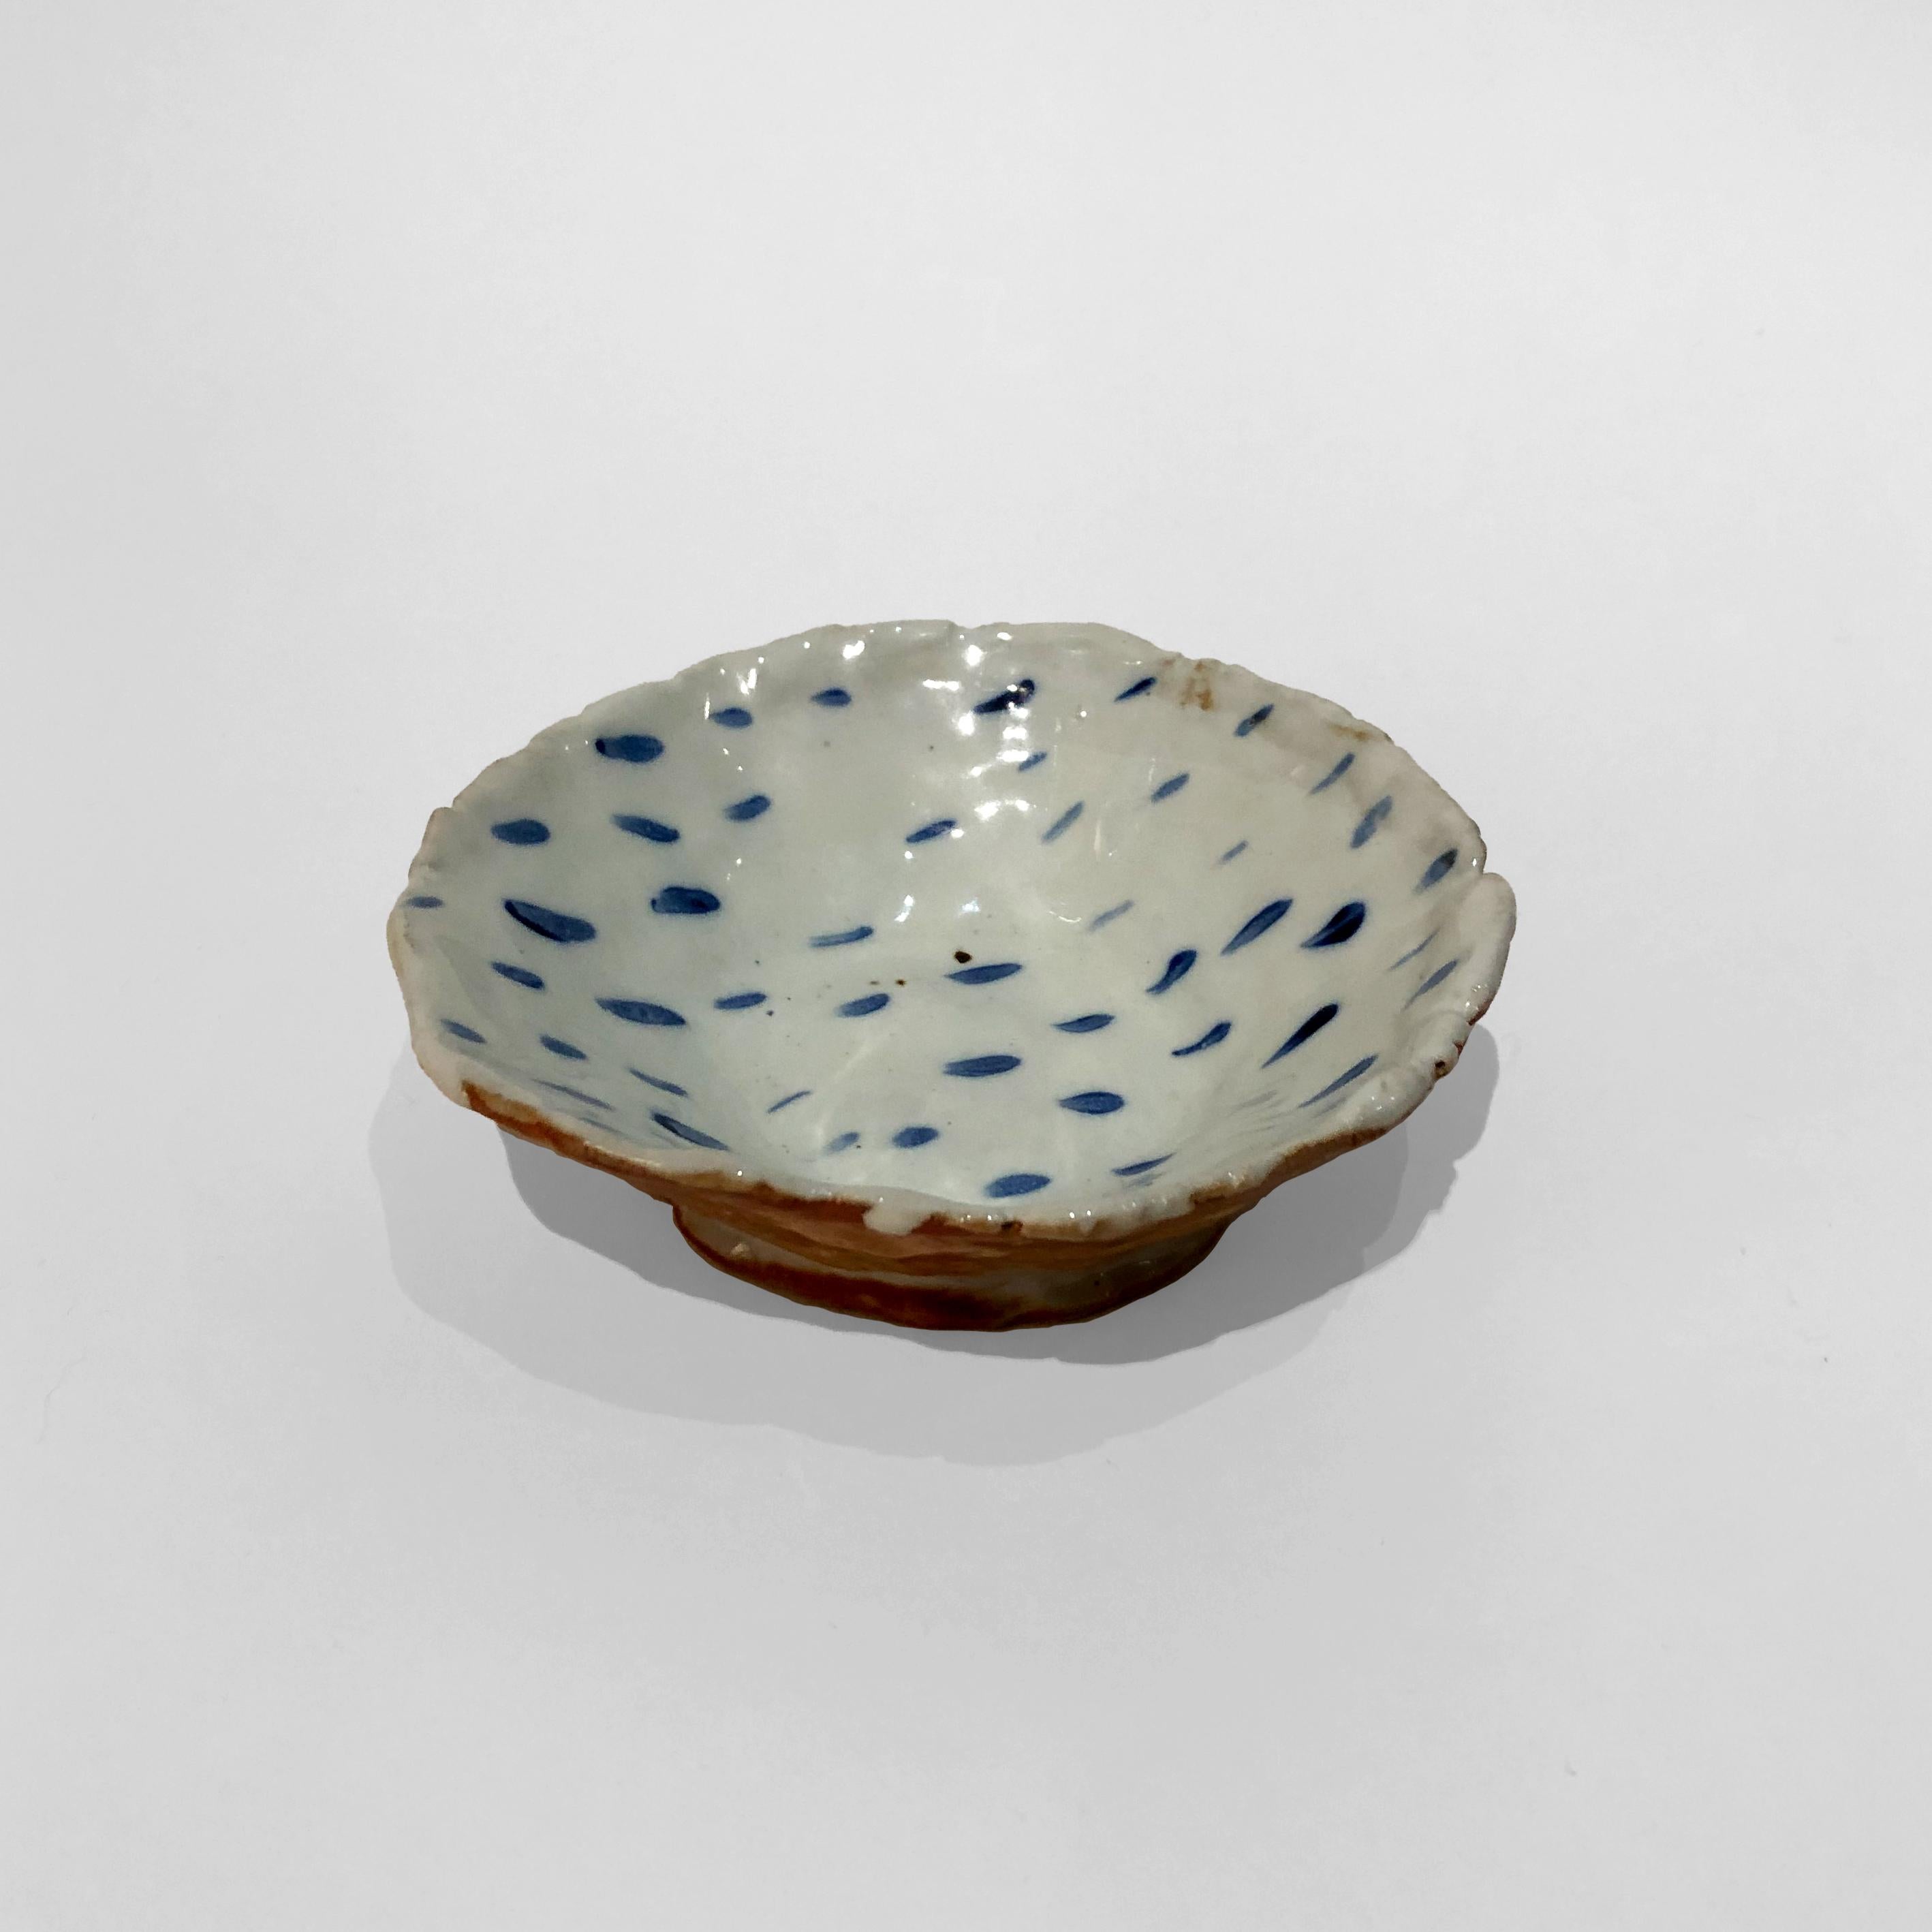 American Ceramic Handbuilt Stoneware Bowl and Plate by Hannelore Freer